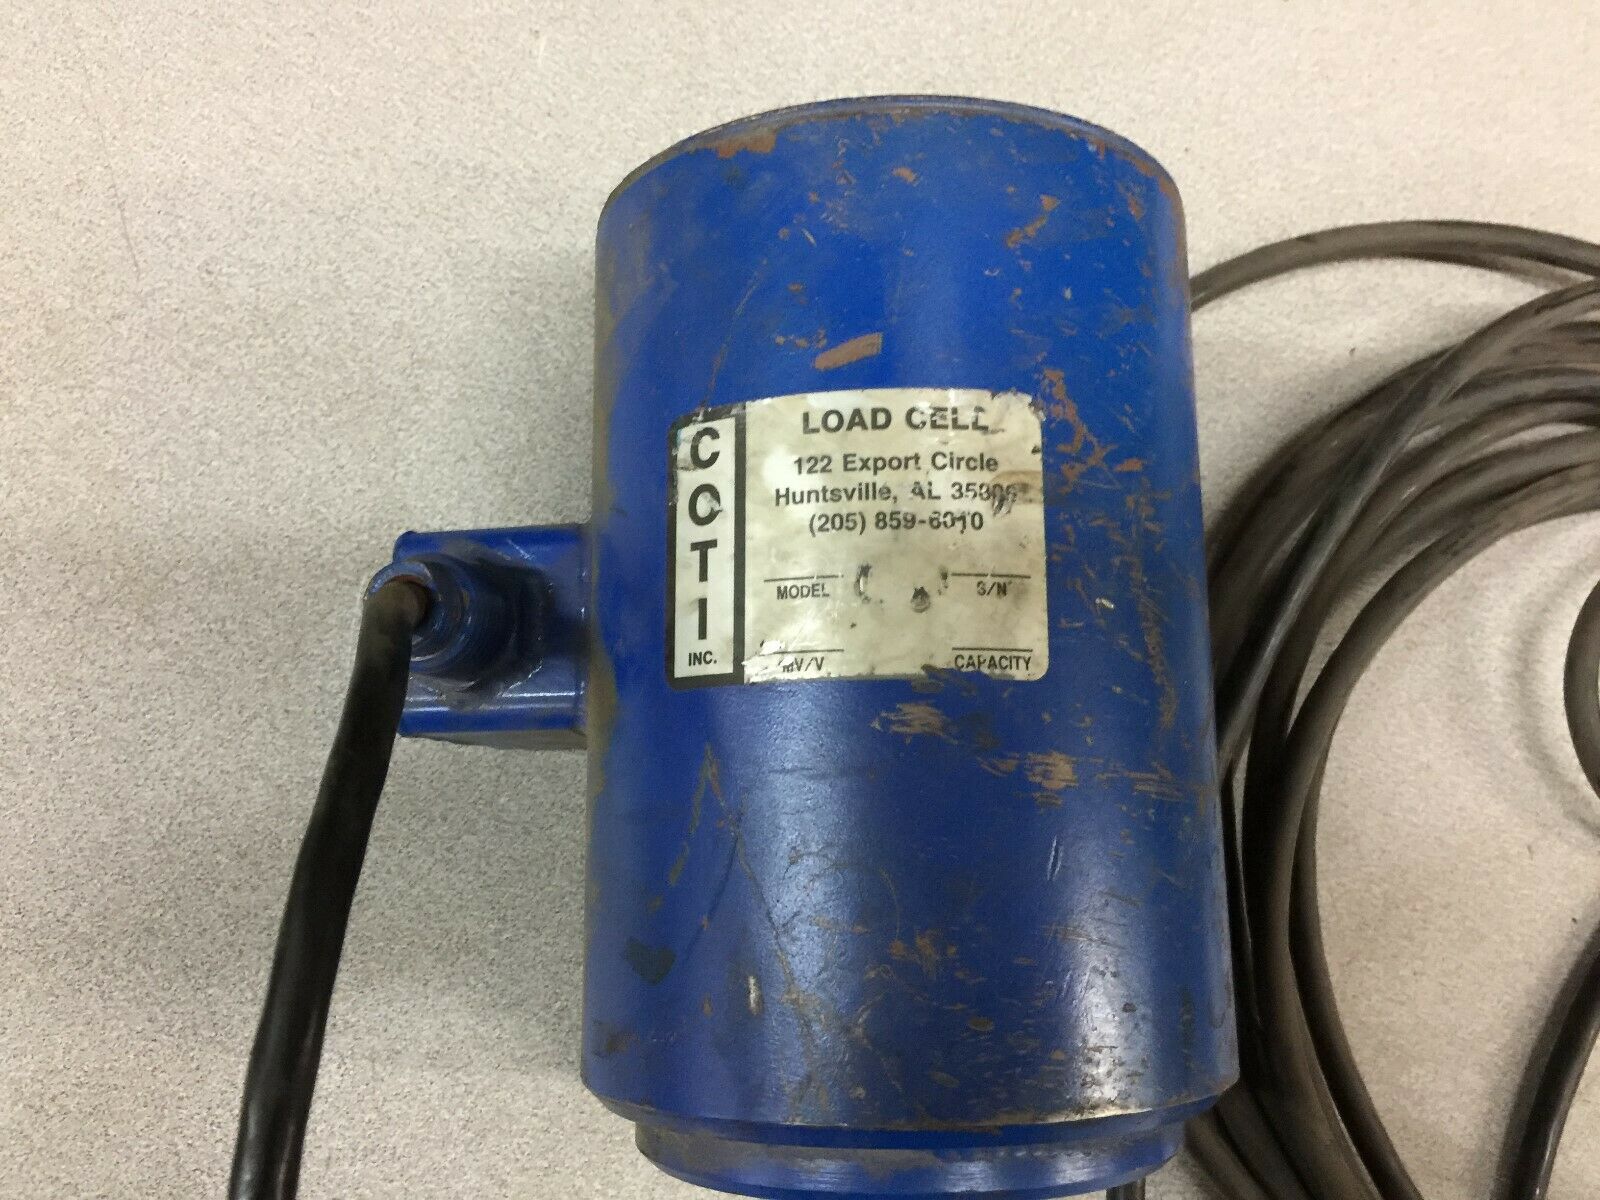 USED COTI LOAD CELL 5155